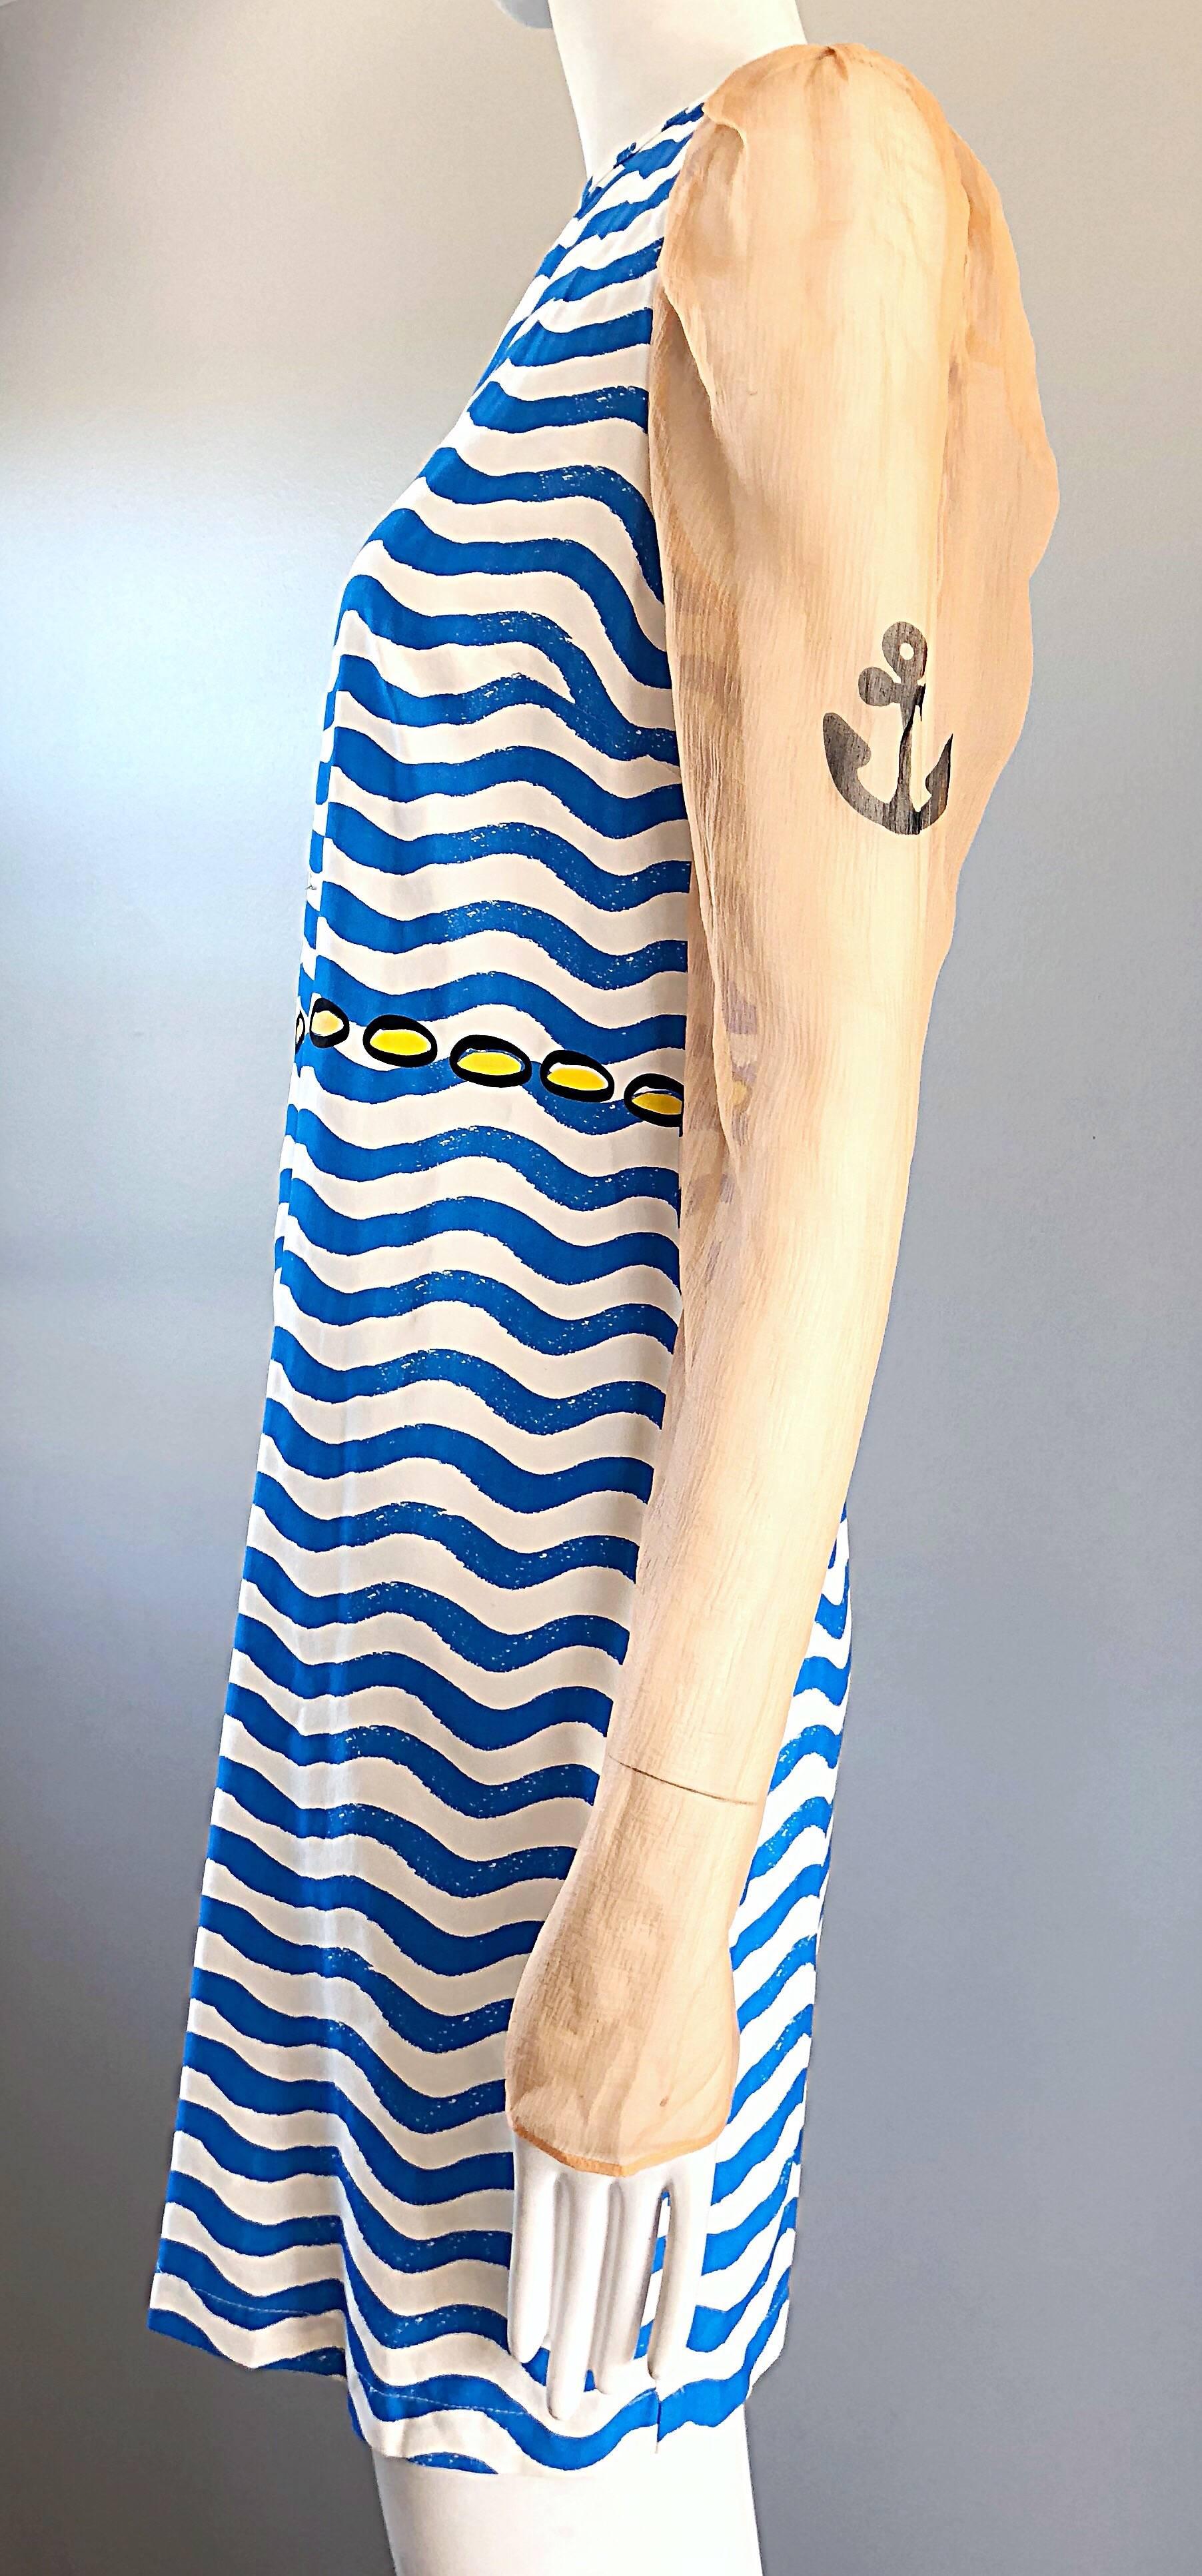 The Rodnik Band Limited Edition Nautical Novelty Tattoo Print New Size 10 Dress In New Condition For Sale In San Diego, CA